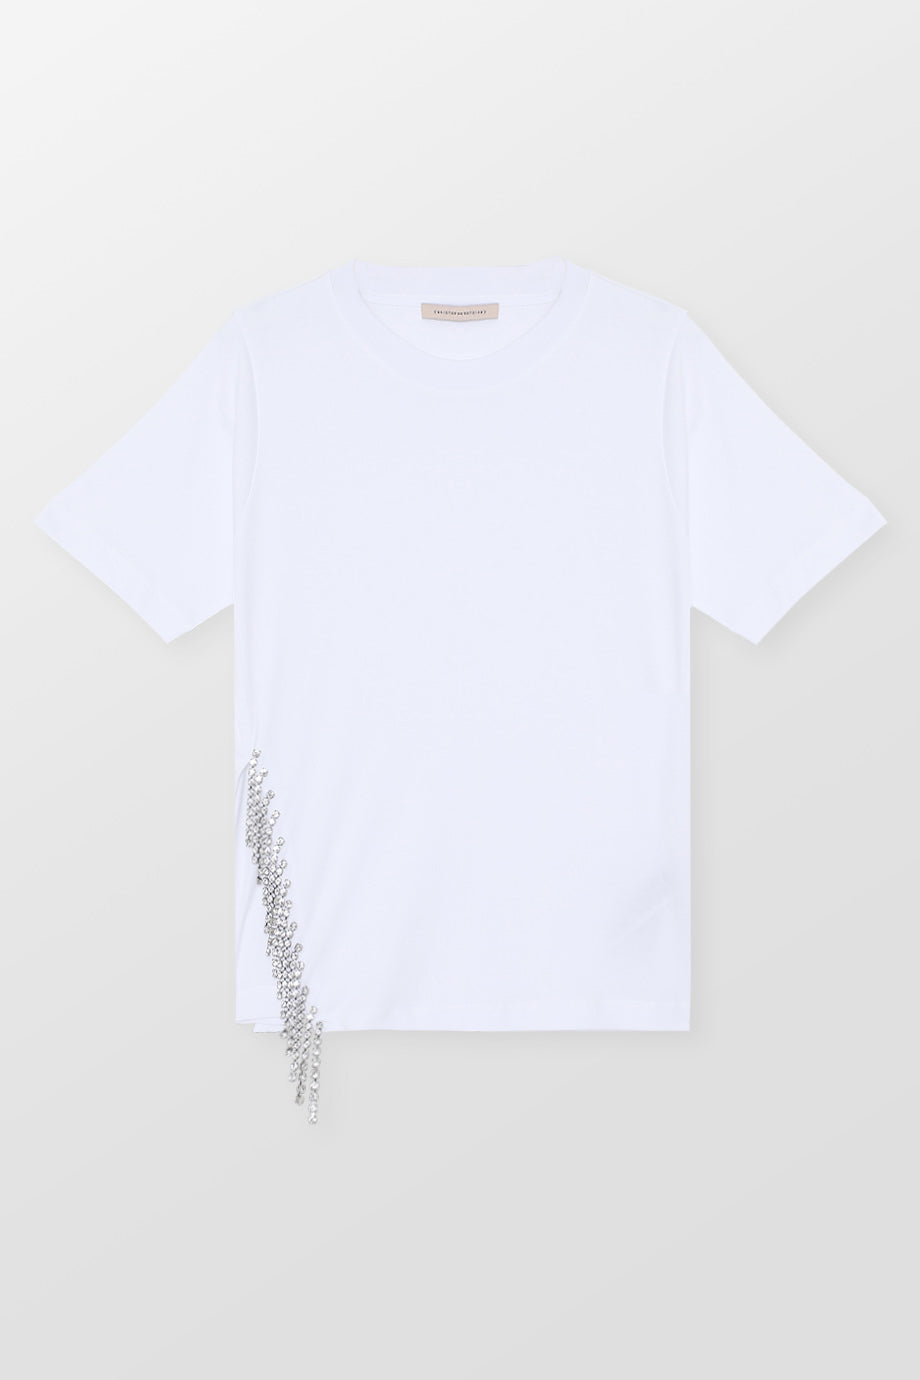 Christopher Kane Crystal Cupchain T-Shirt in White. Front view.